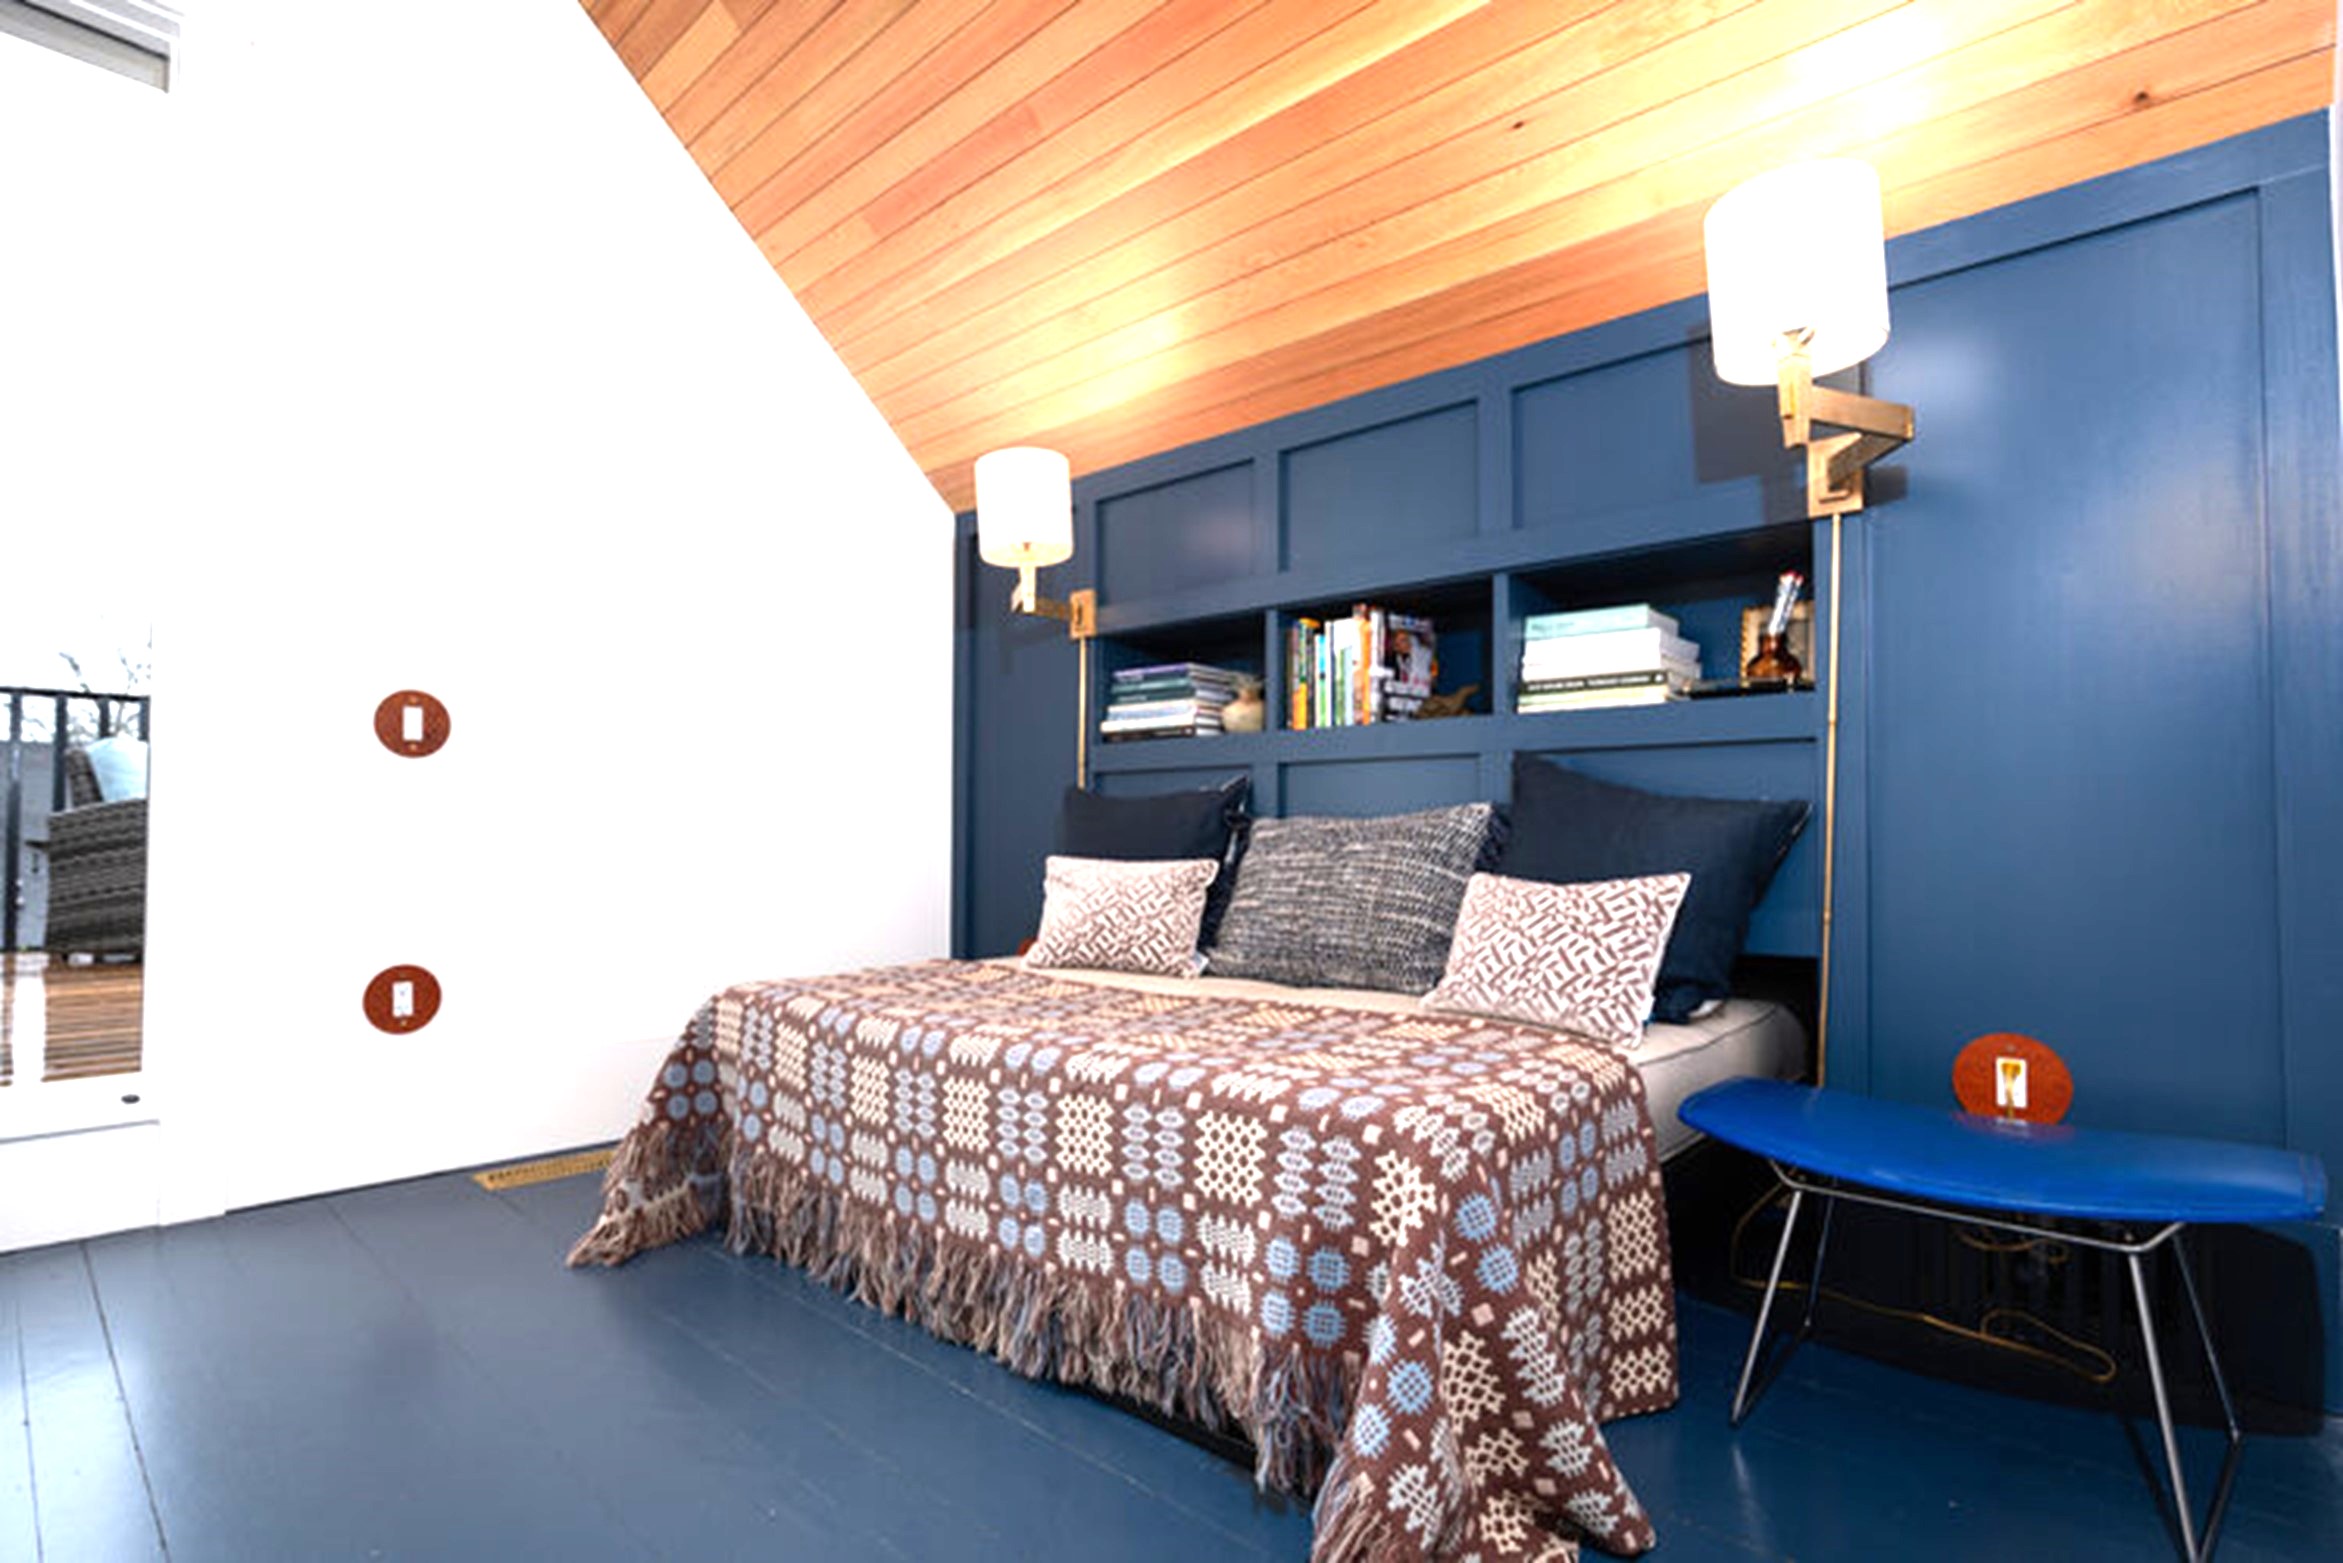 Hemp covered, buttoned daybed in room with blue floor and dormered ceiling - photo